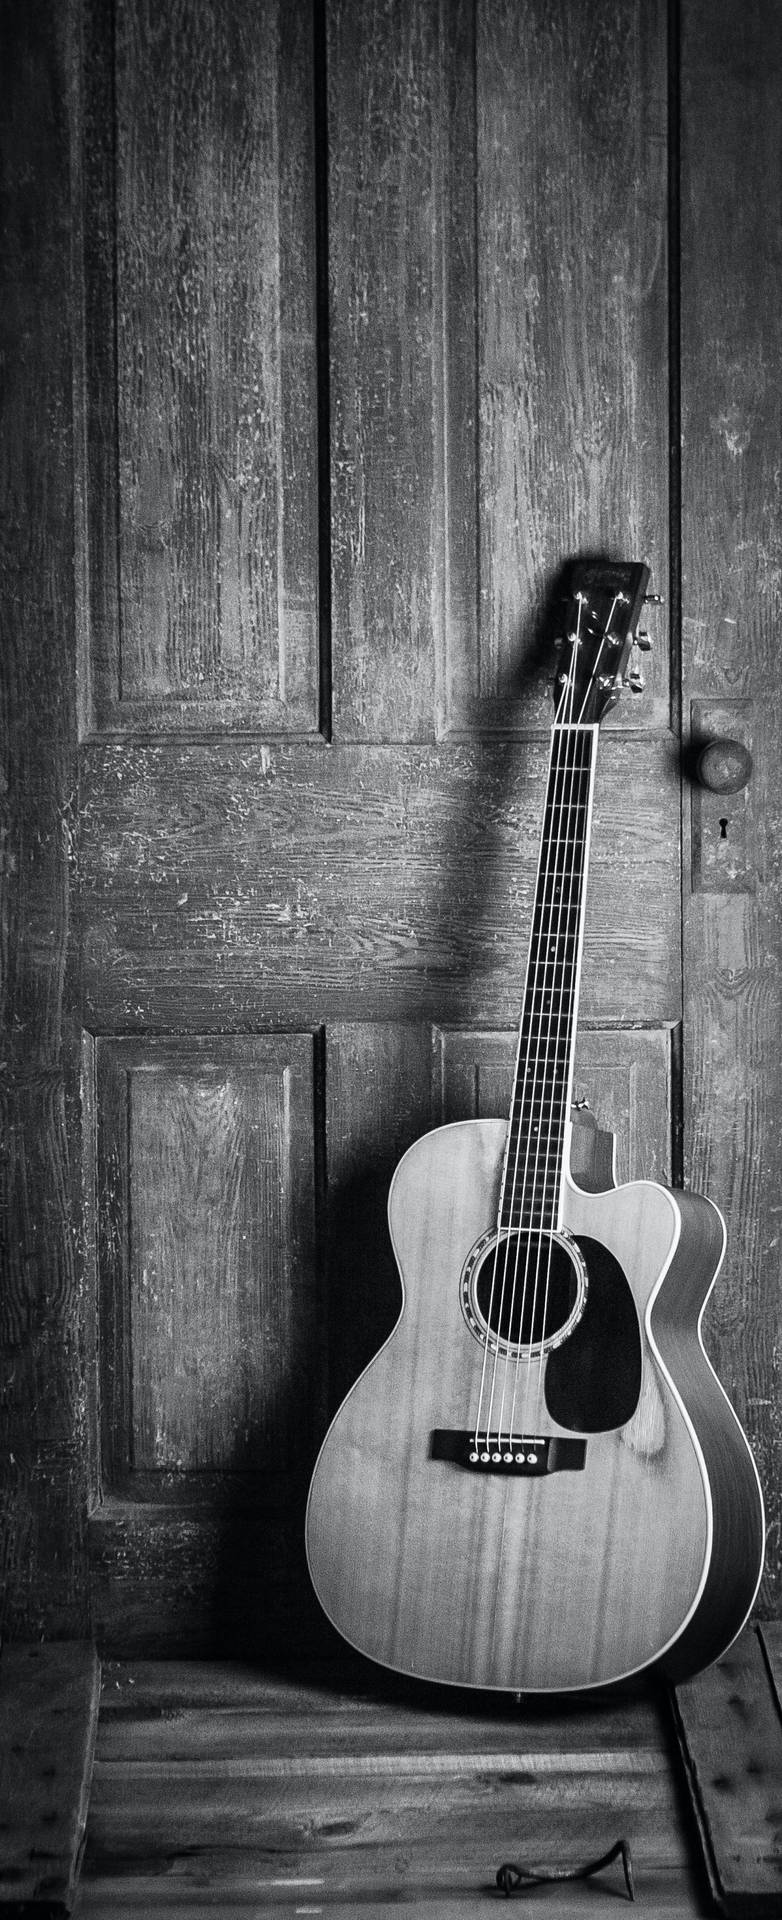 Coolest Iphone Black And White Guitar Wallpaper